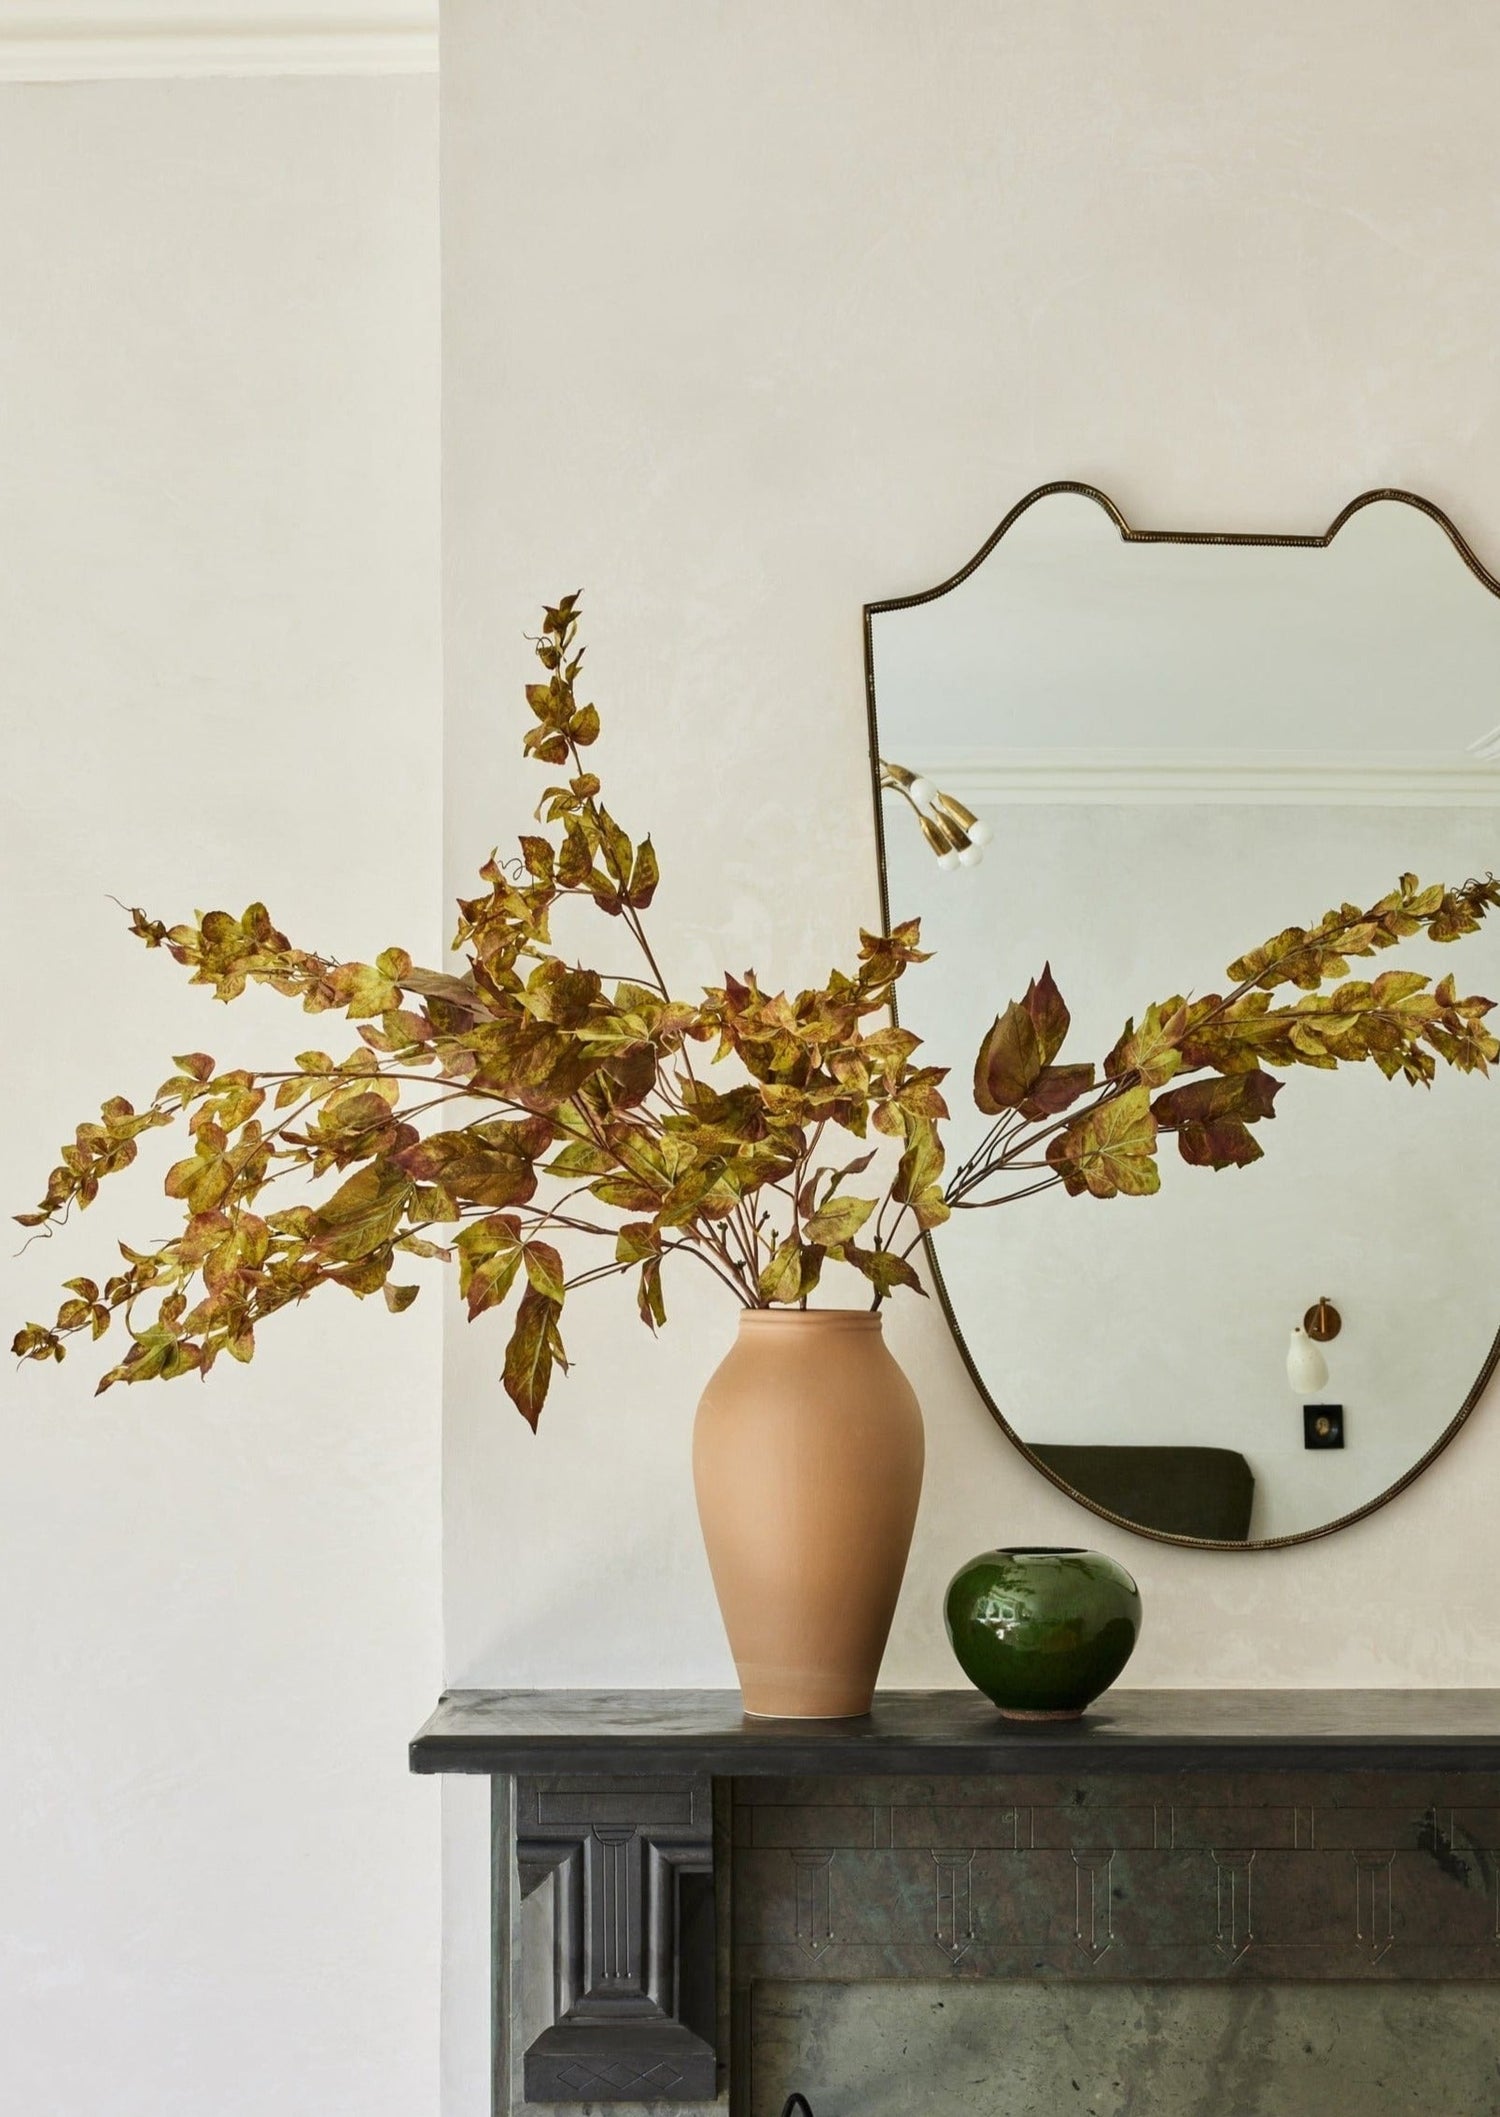 Fall Mantle Styling with Handmade Clay Bowl Vase in Green Glaze